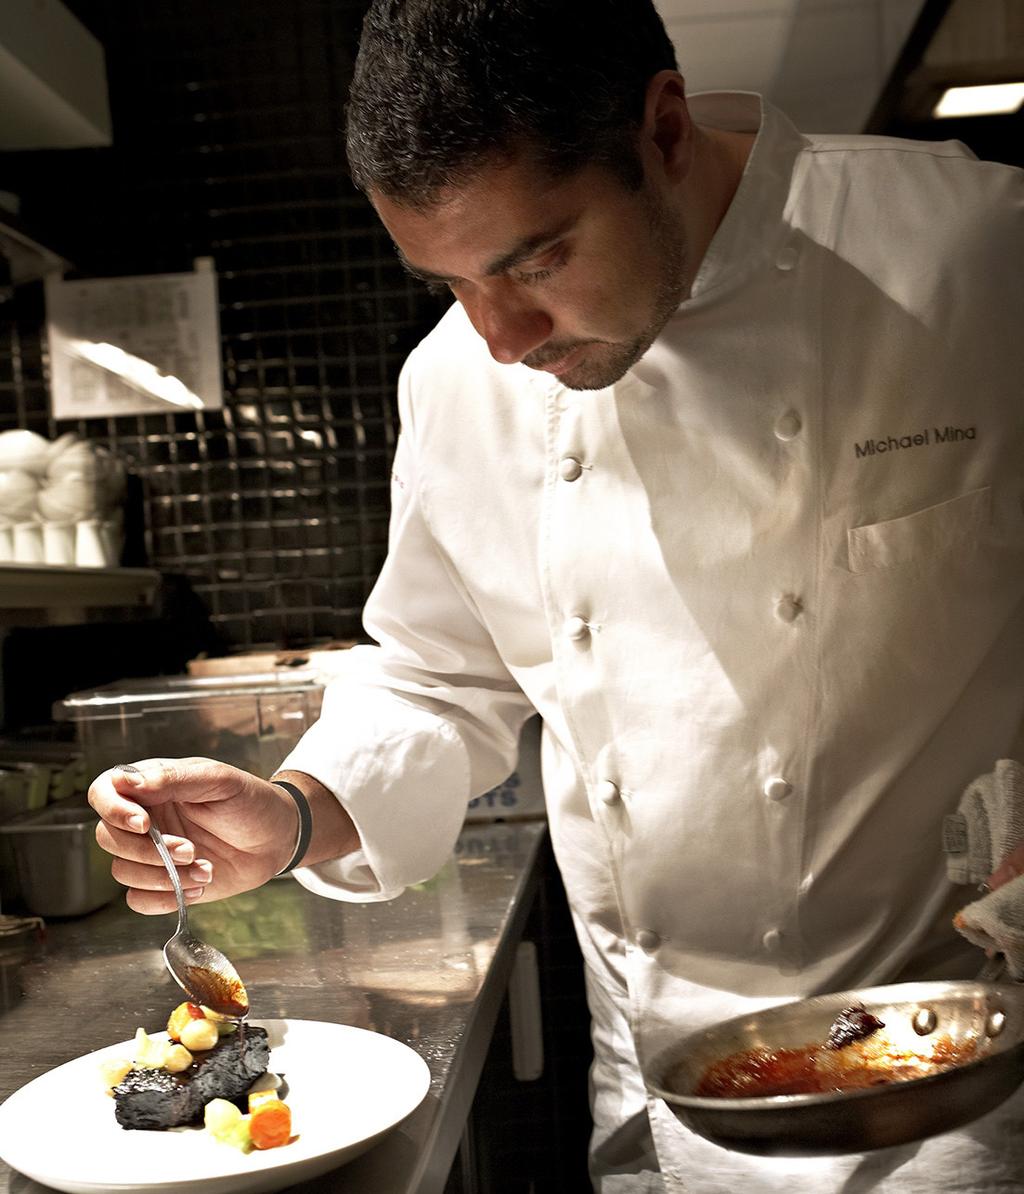 ABOUT MICHAEL MINA Michelin-Starred Chef Michael Mina first appeared on the culinary map as executive chef at Aqua Restaurant in San Francisco.